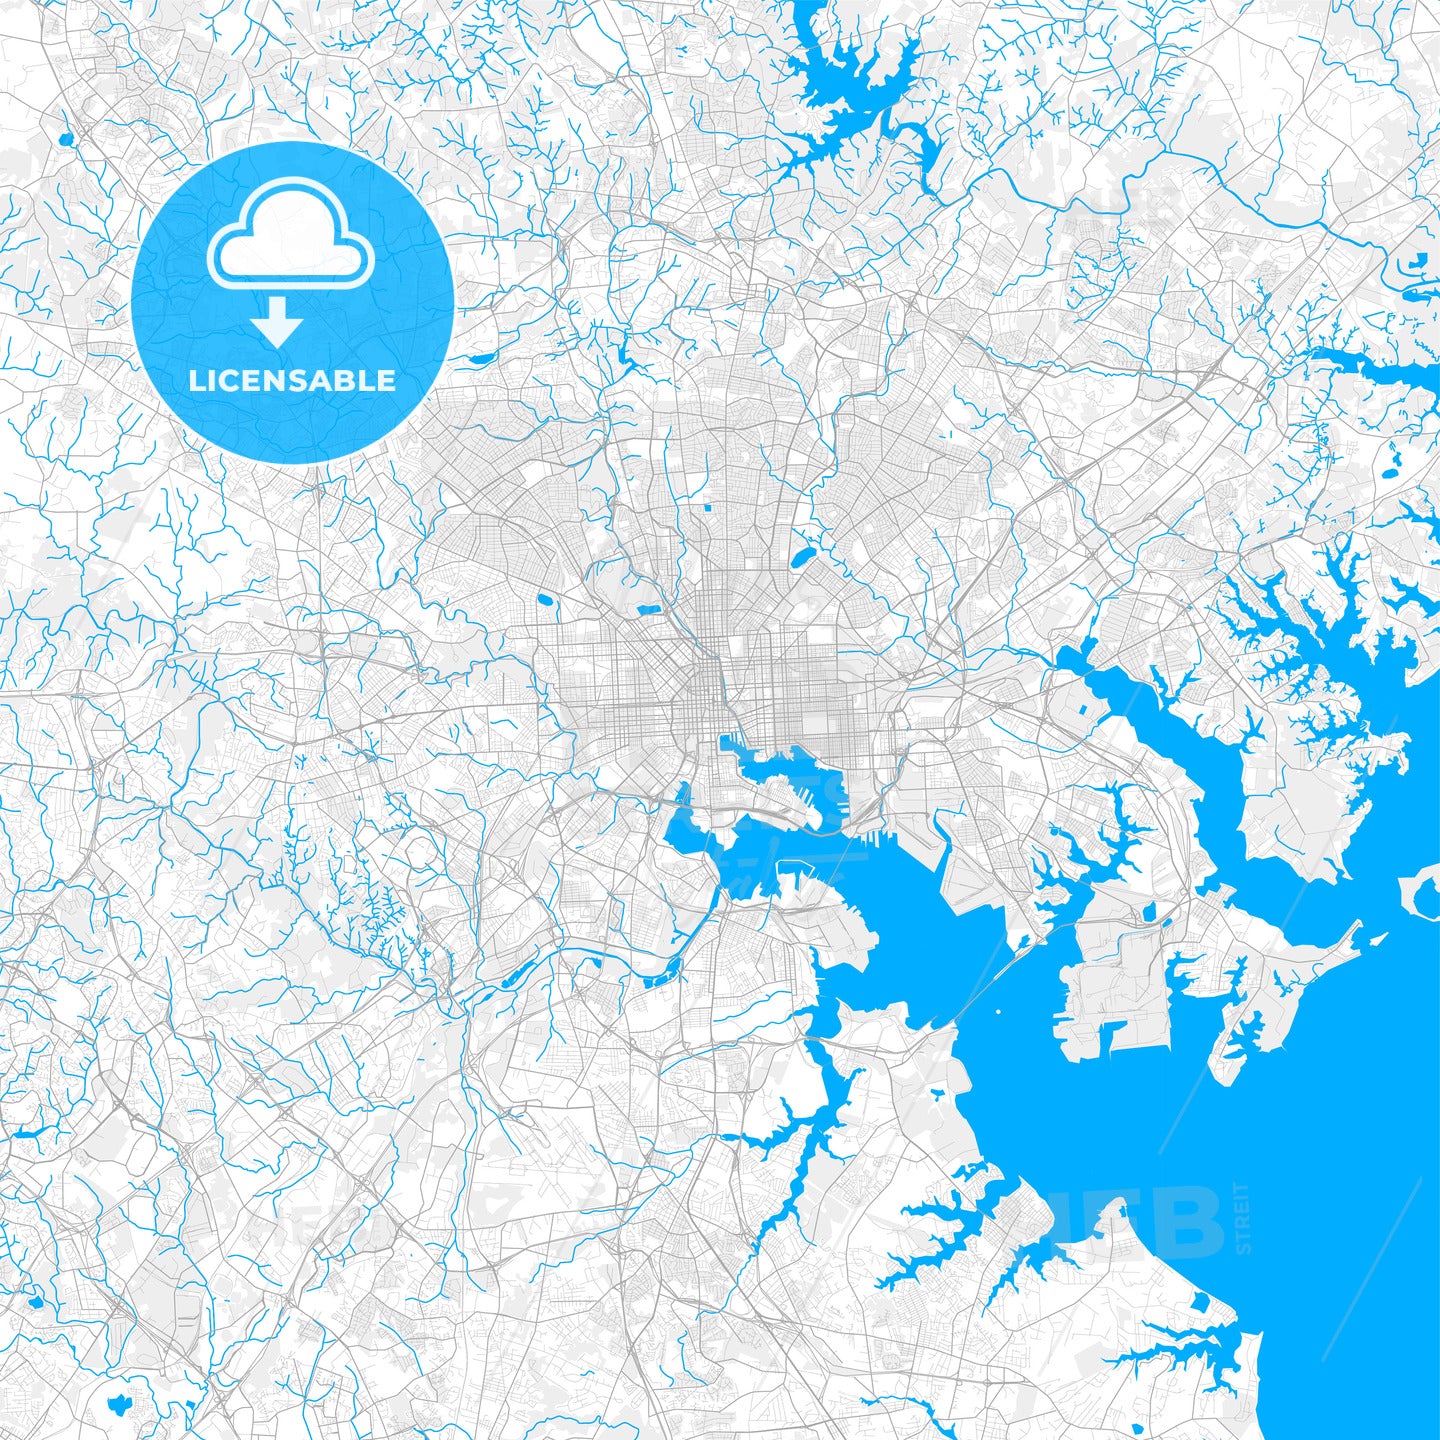 Rich detailed vector map of Baltimore, Maryland, U.S.A.